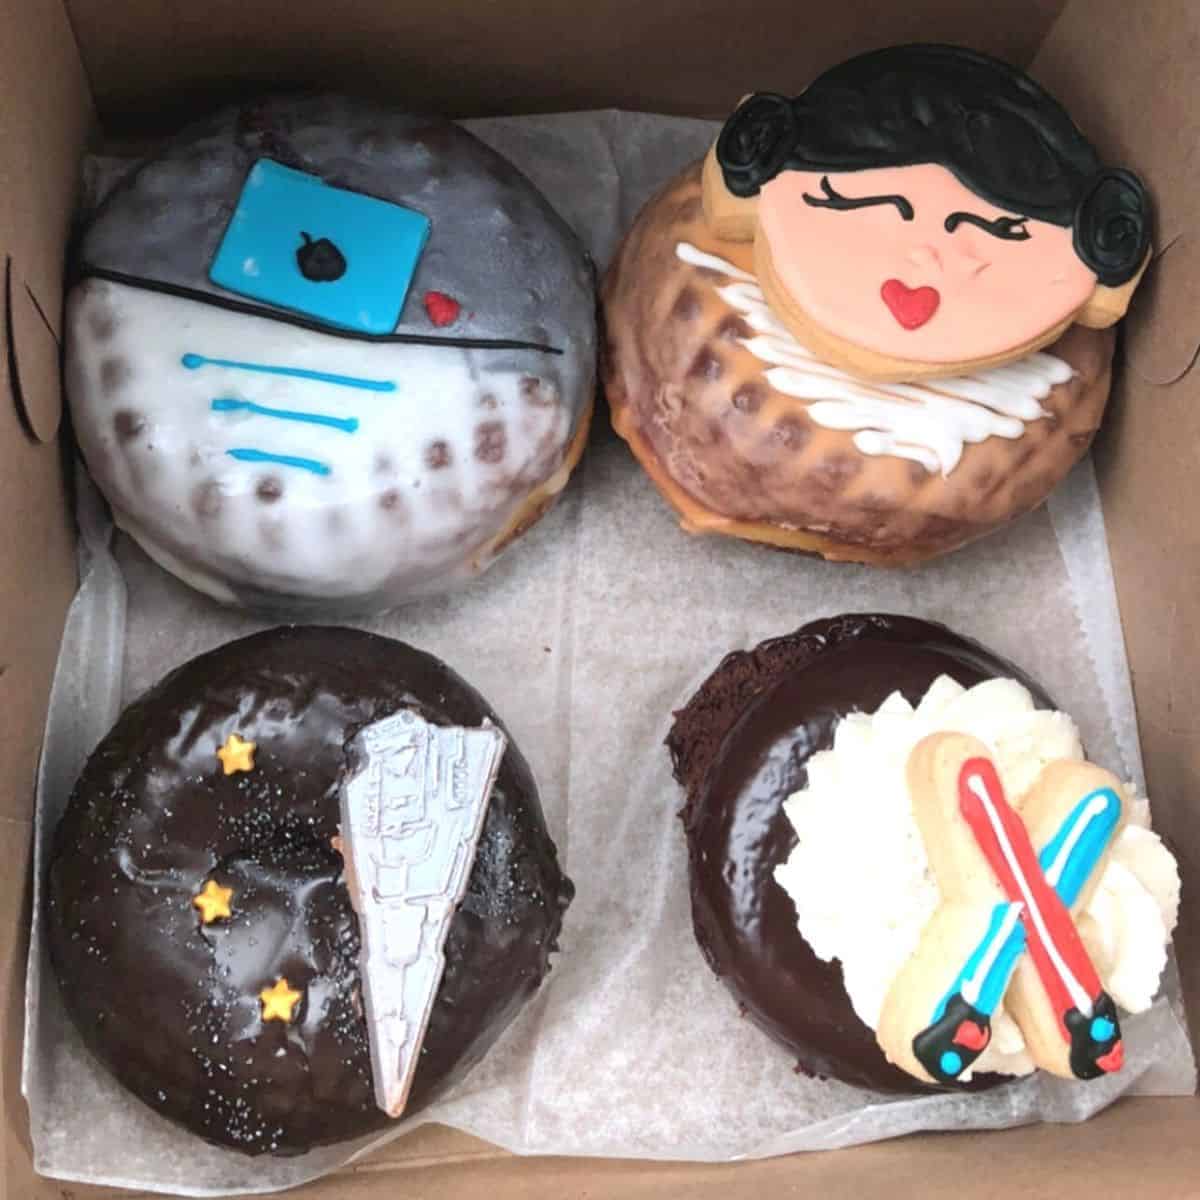 star wars themed deviant donuts.